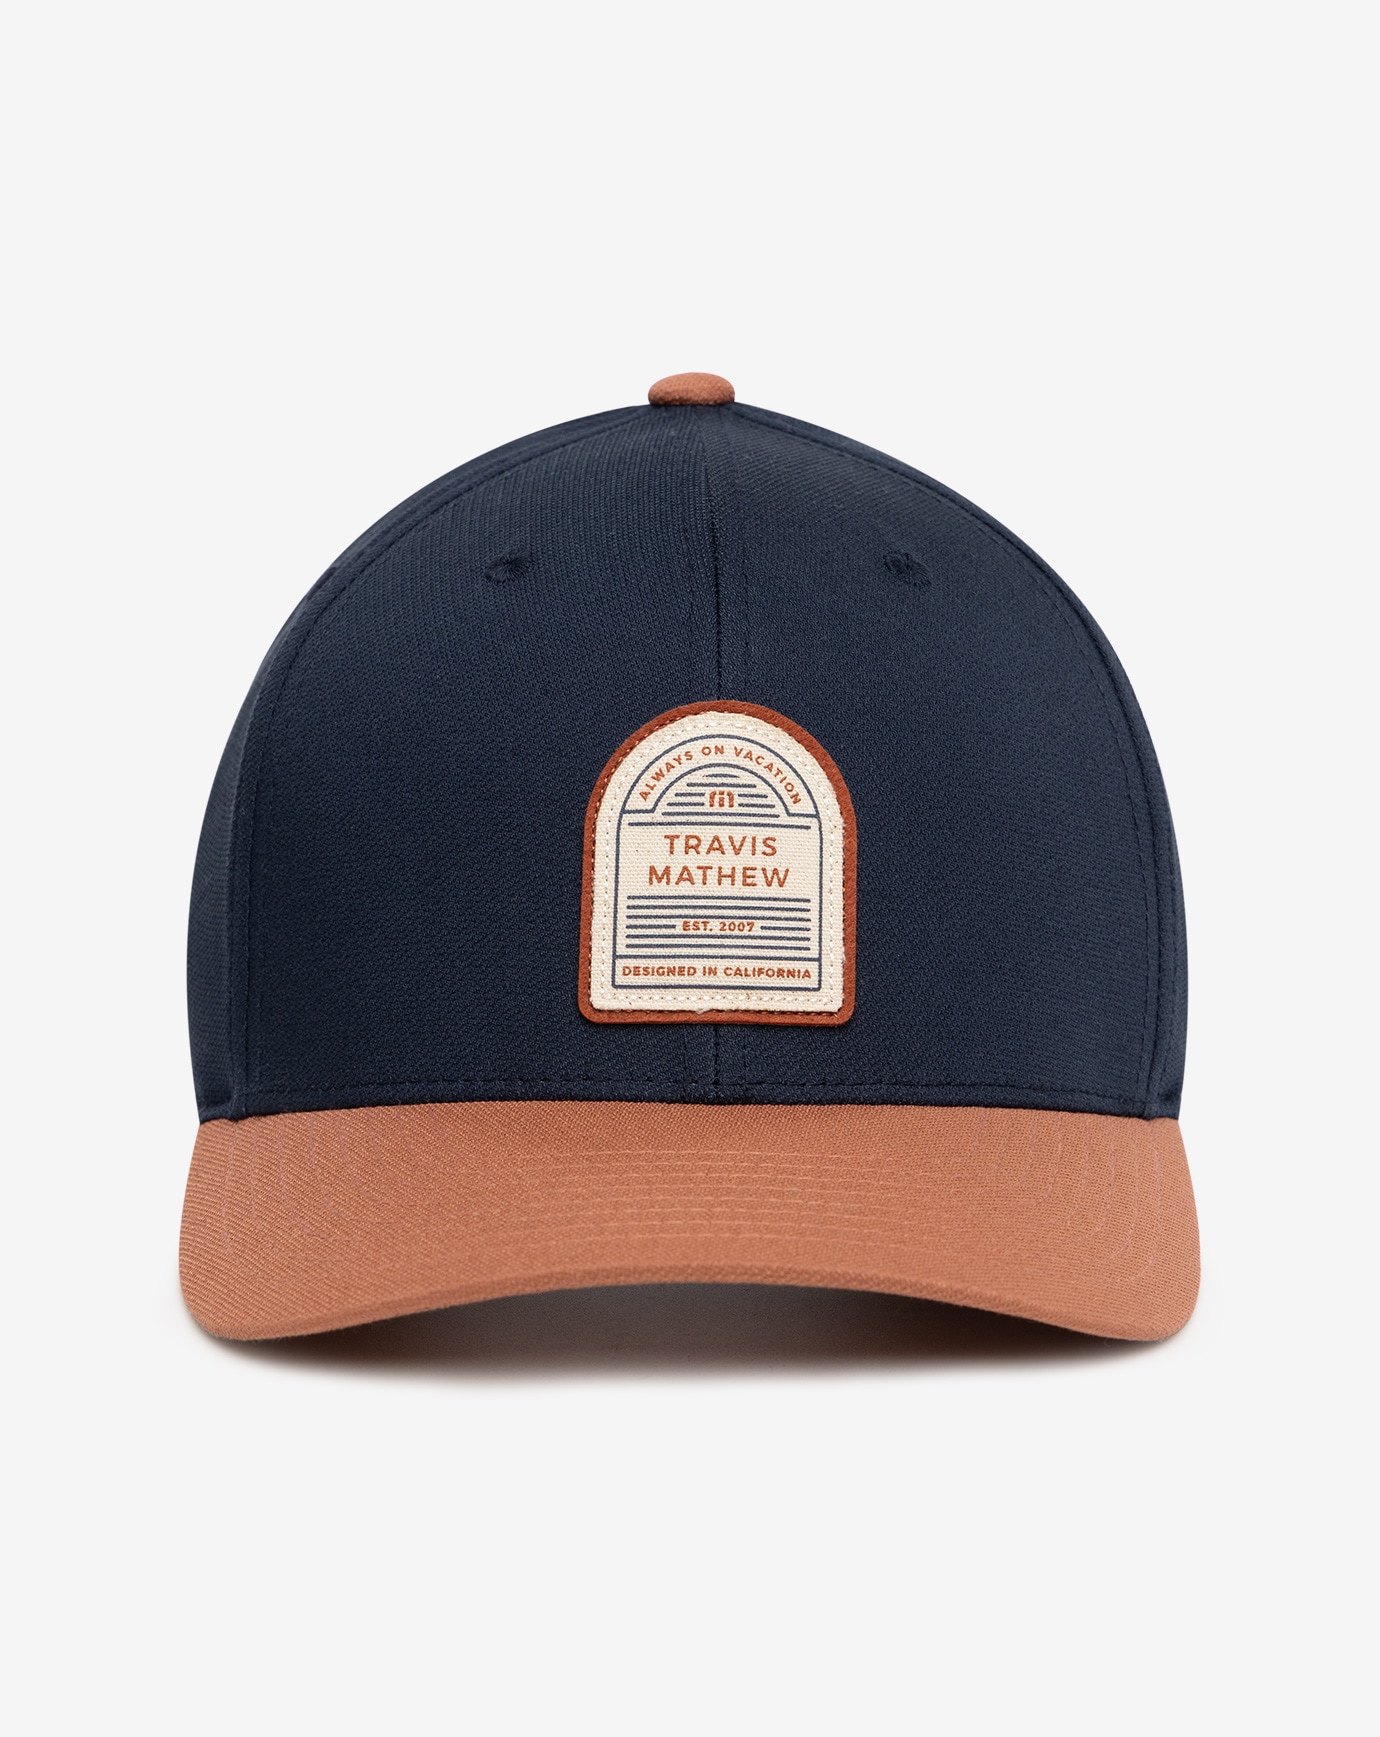 Related Product - INSTANT CONNECTION SNAPBACK HAT